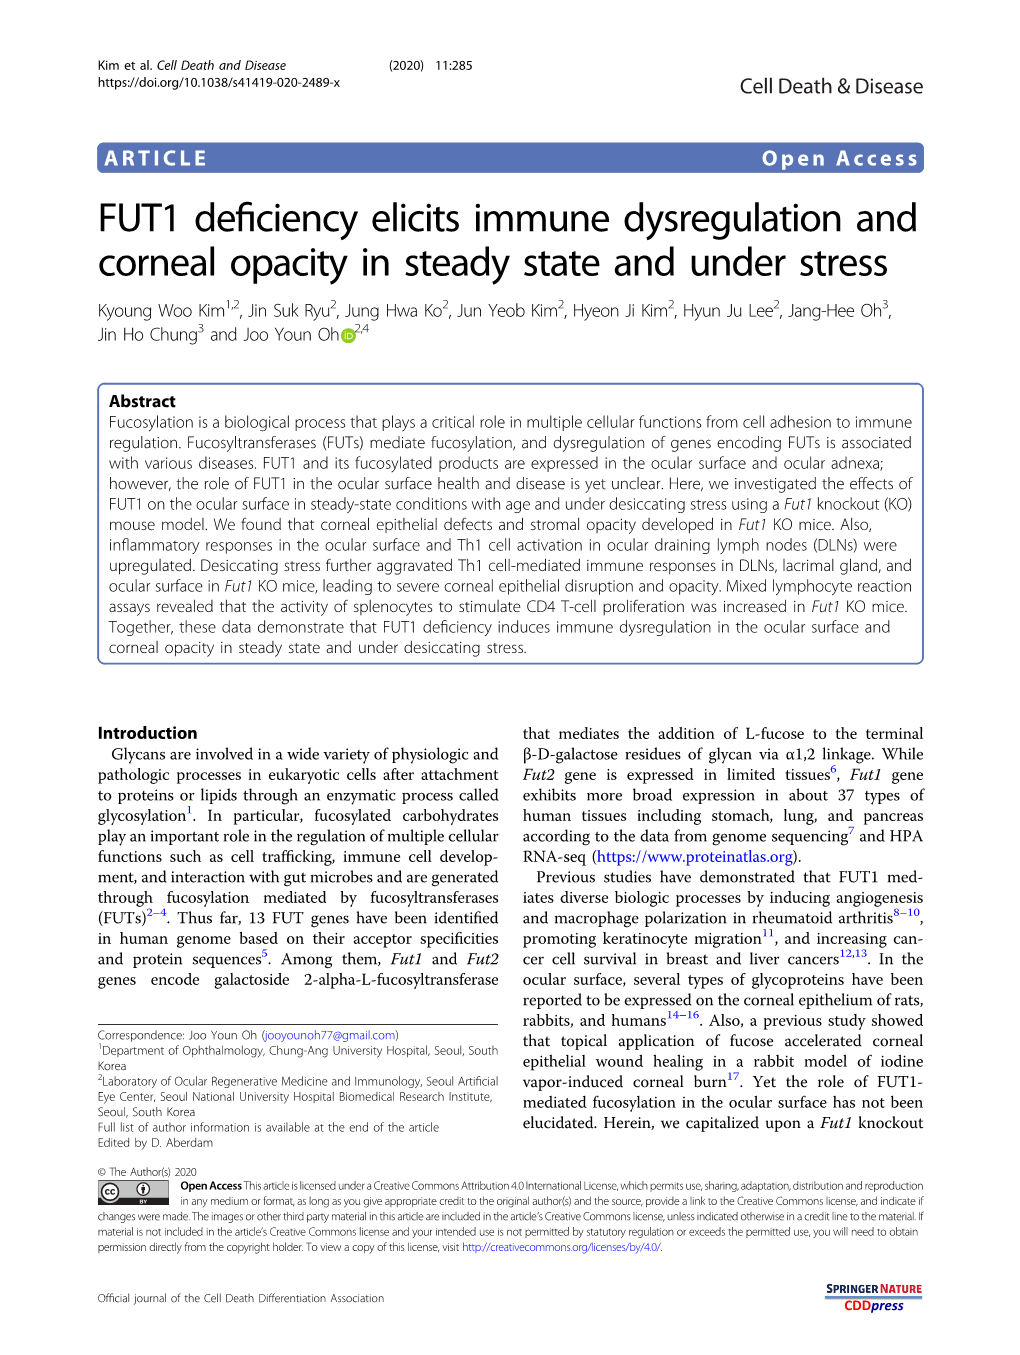 FUT1 Deficiency Elicits Immune Dysregulation and Corneal Opacity